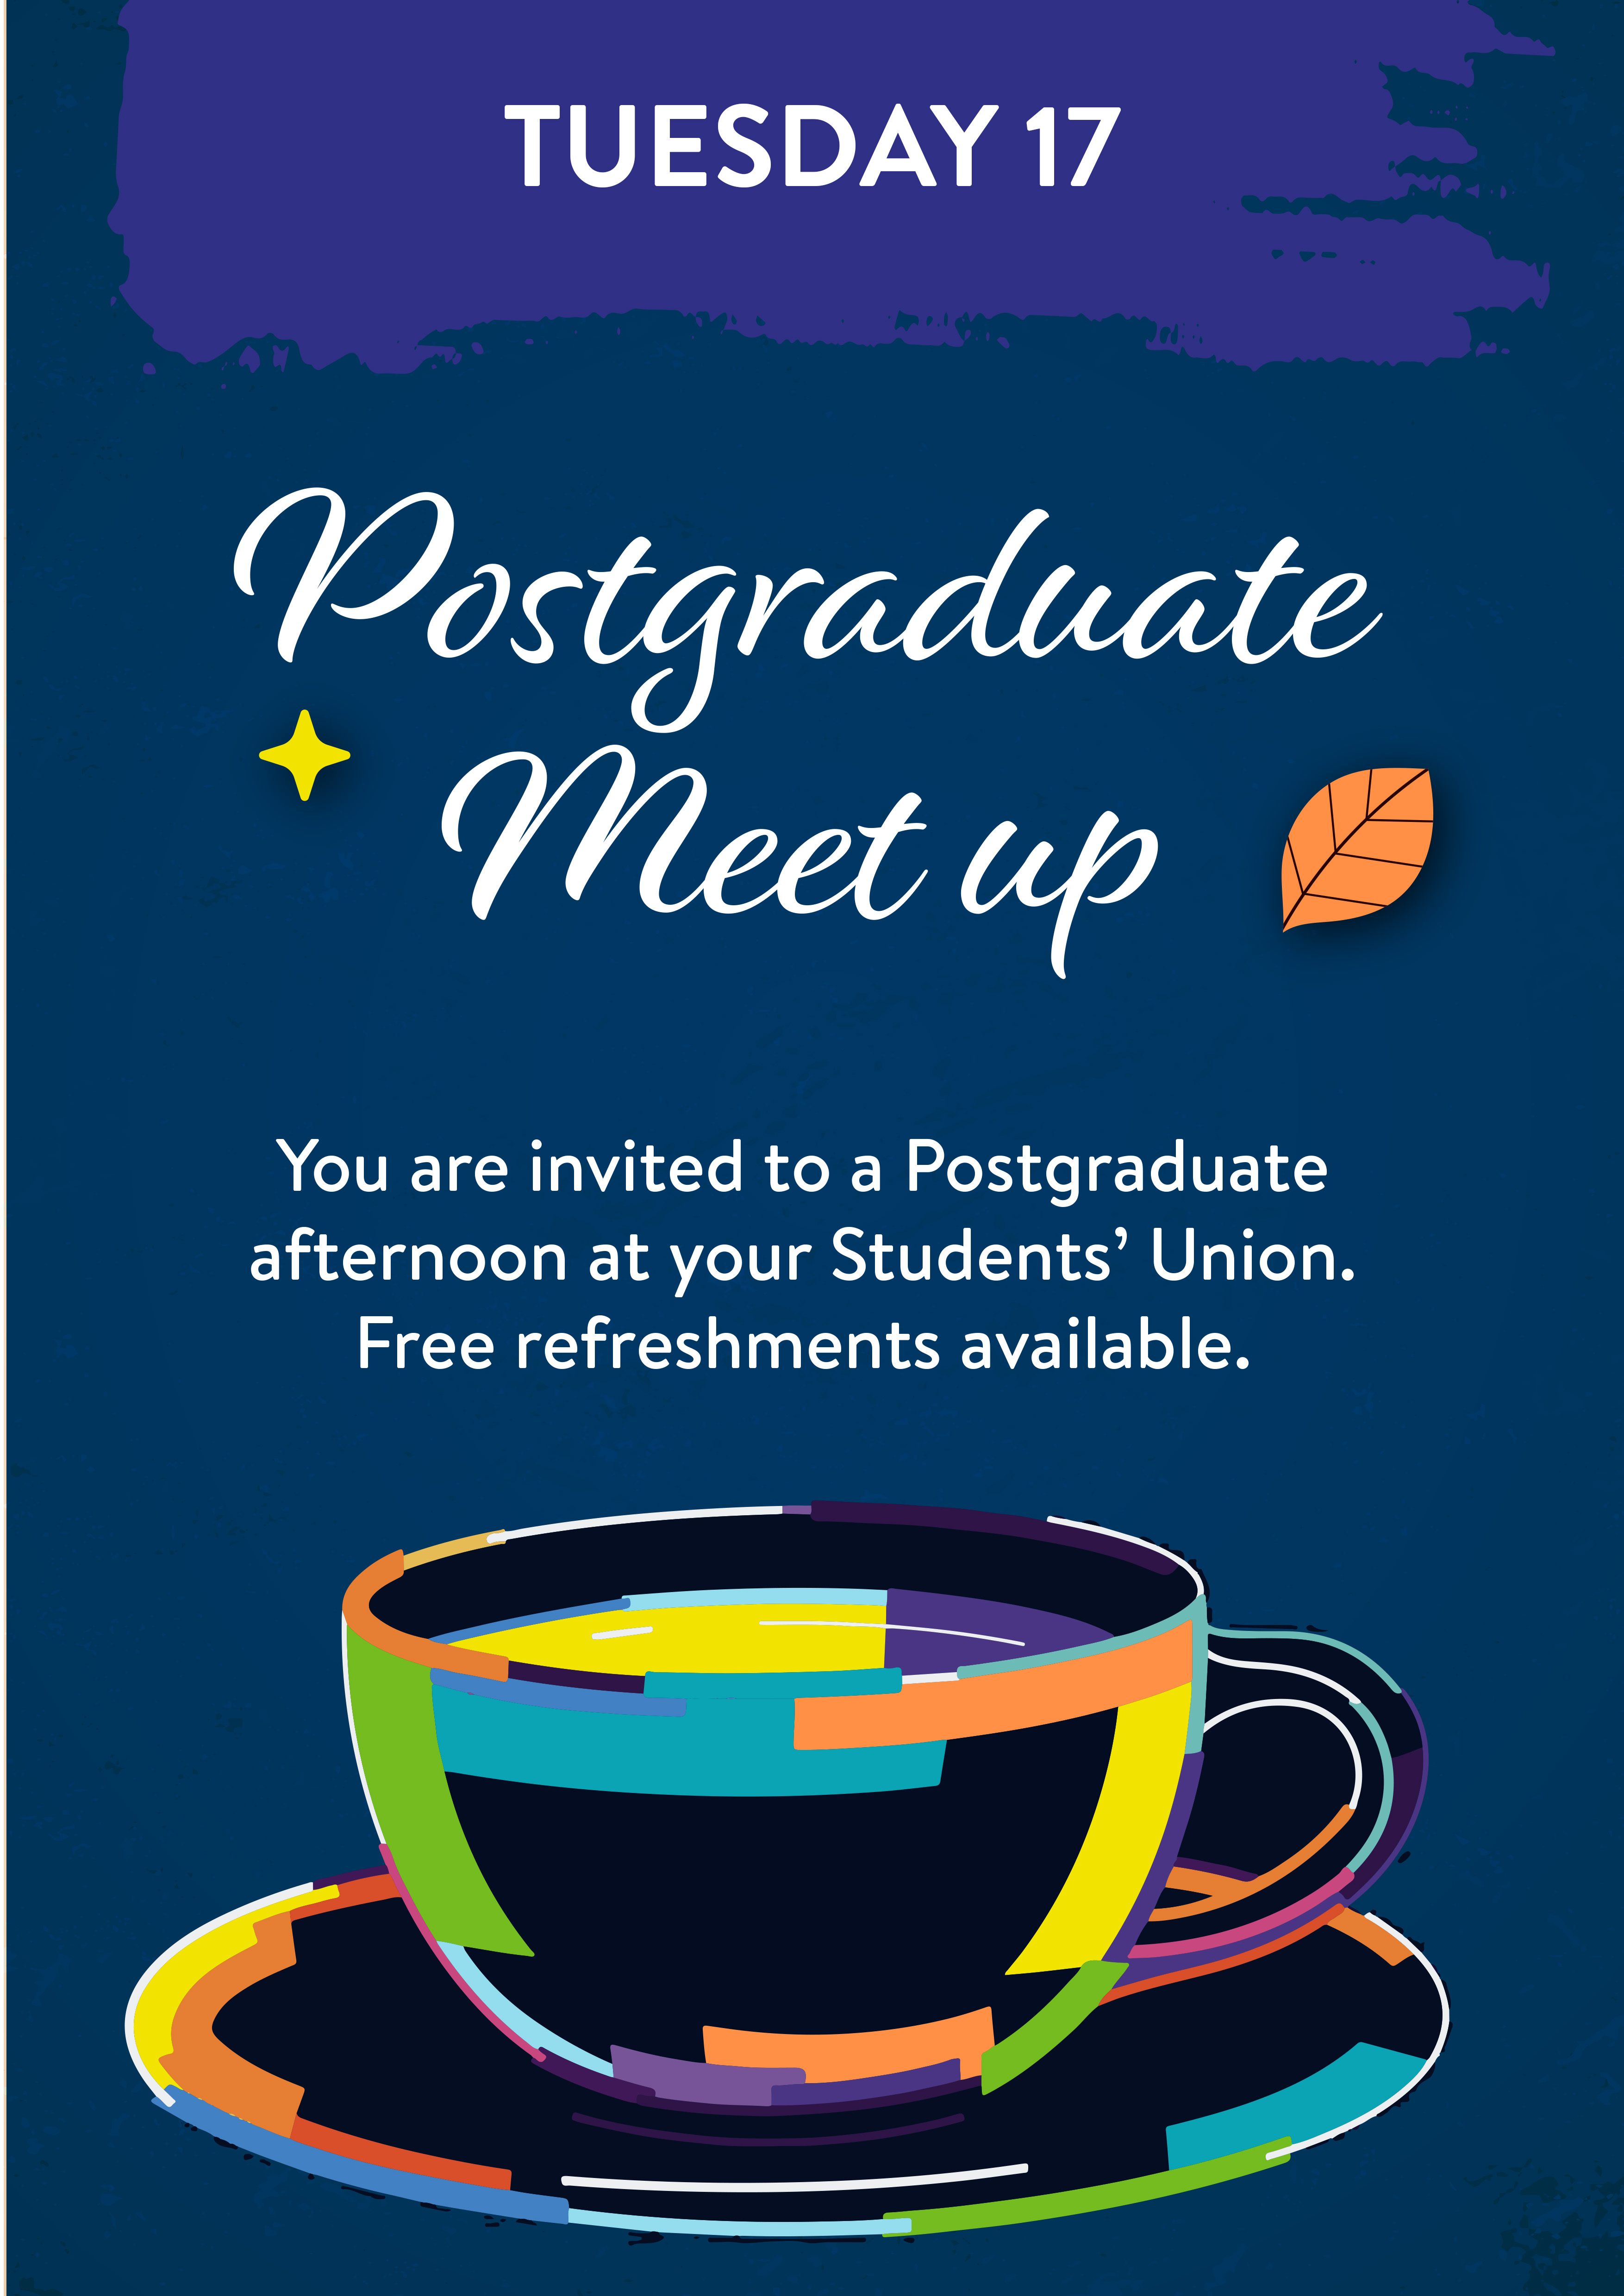 Tuesday 17 January. Postgraduate Meet Up. You are invited to an Postgraduate afternoon at your Students' Union. Free refreshments available.